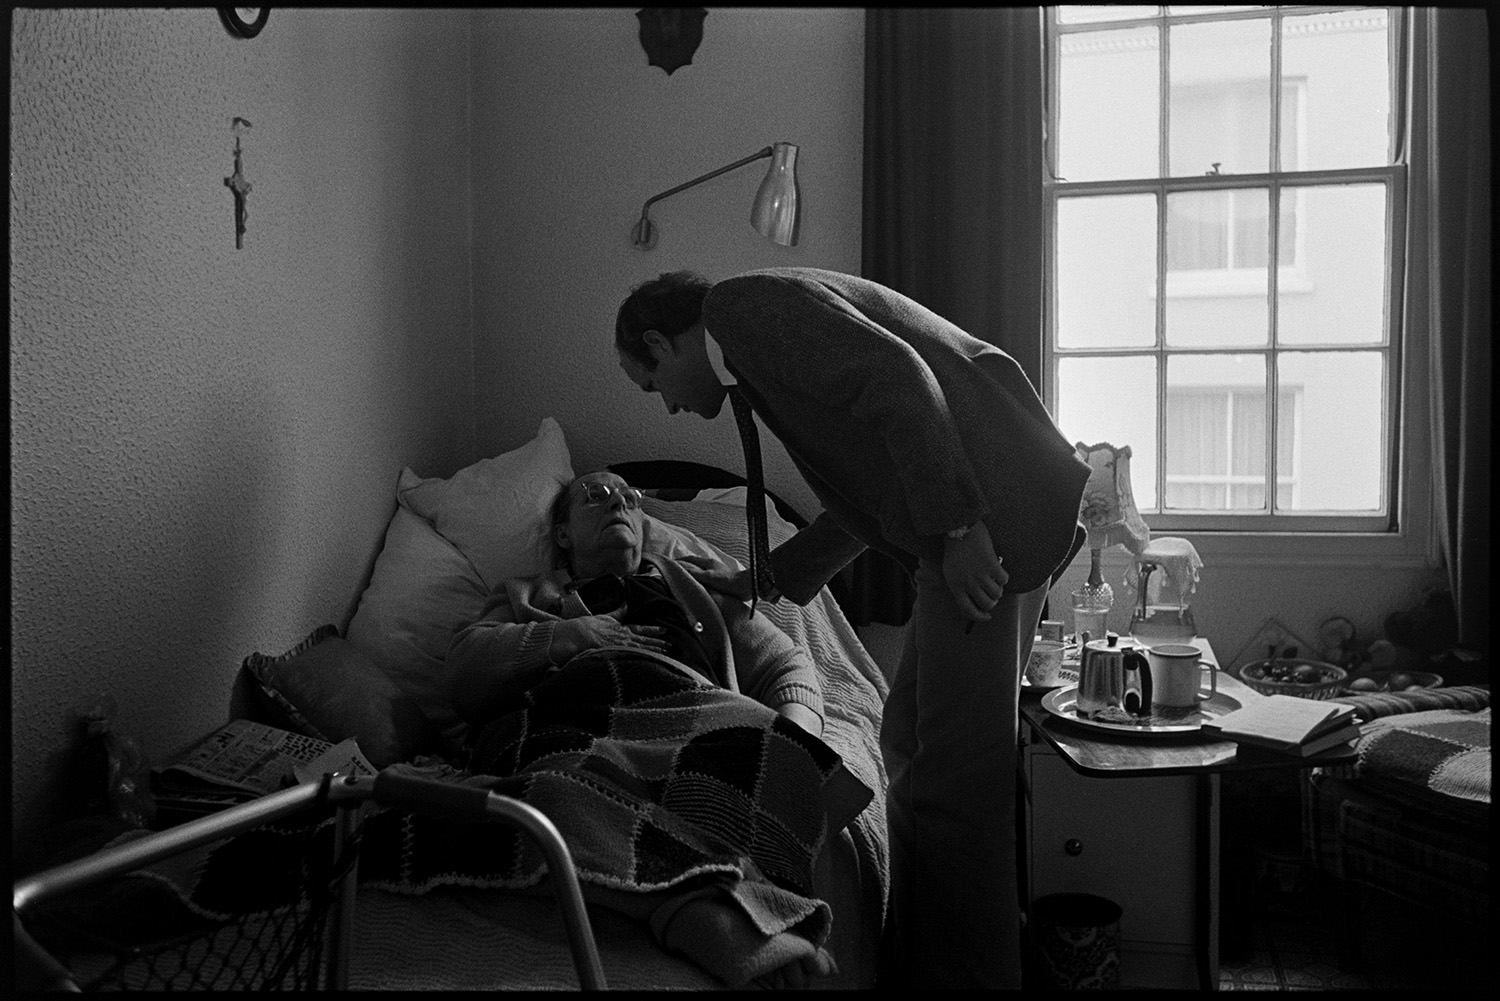 Doctor on his rounds talking woman patient in bed in cottage hospital. 
[Doctor Richard Westcott visiting a patient in South Molton Cottage Hospital. A bedside table with a lamp, mug and teapot is visible.]